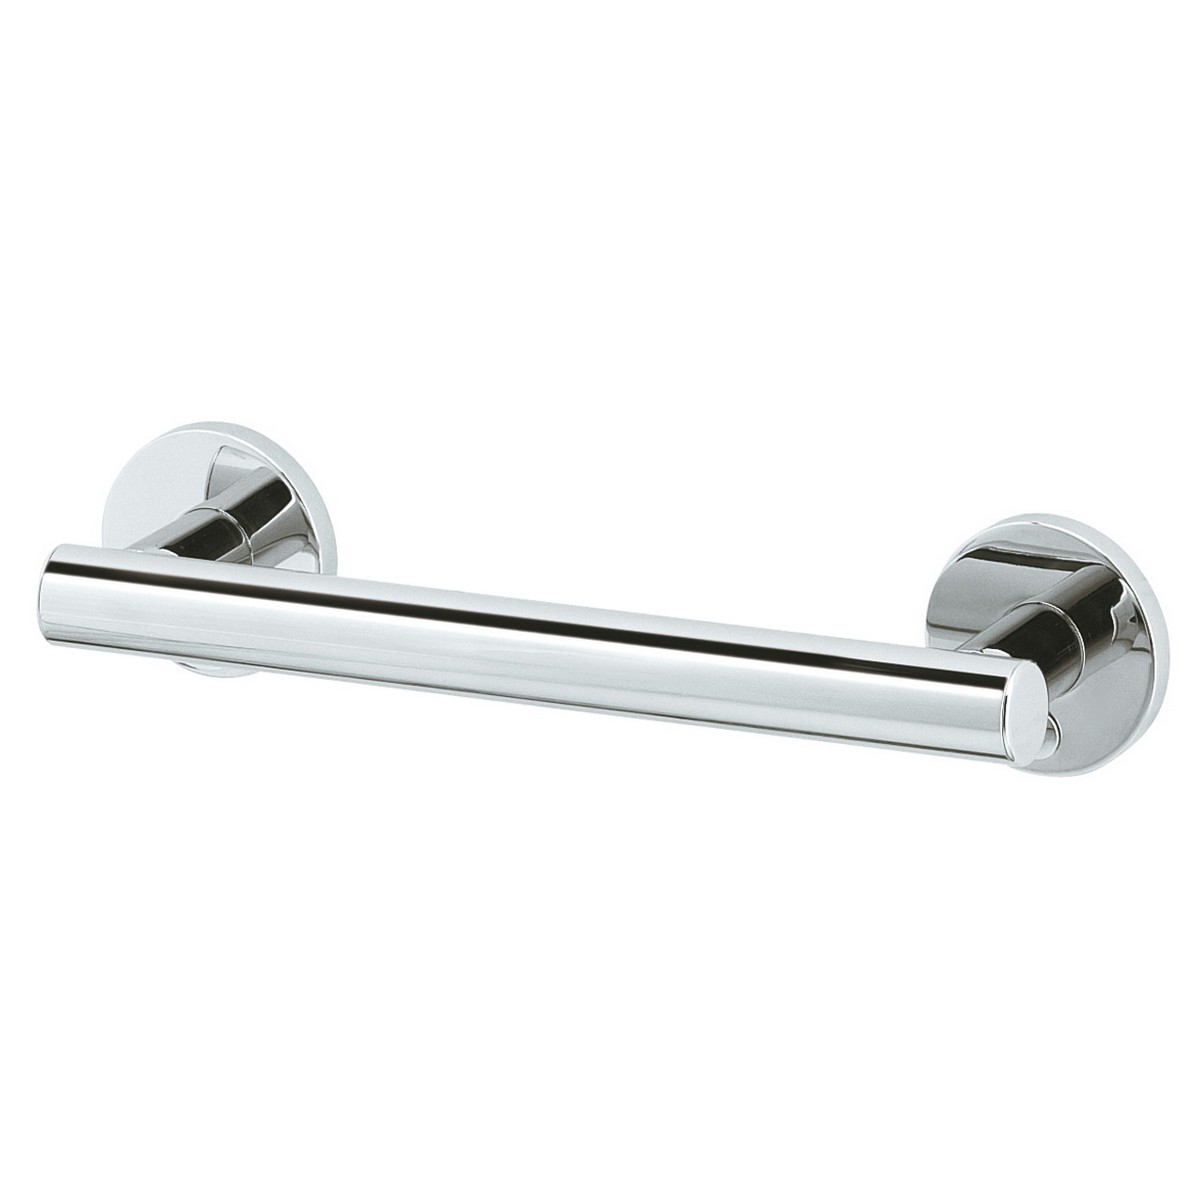 KEUCO 35901012400 PLAN CARE 24 INCH WALL MOUNTED SUPPORT RAIL IN POLISHED CHROME